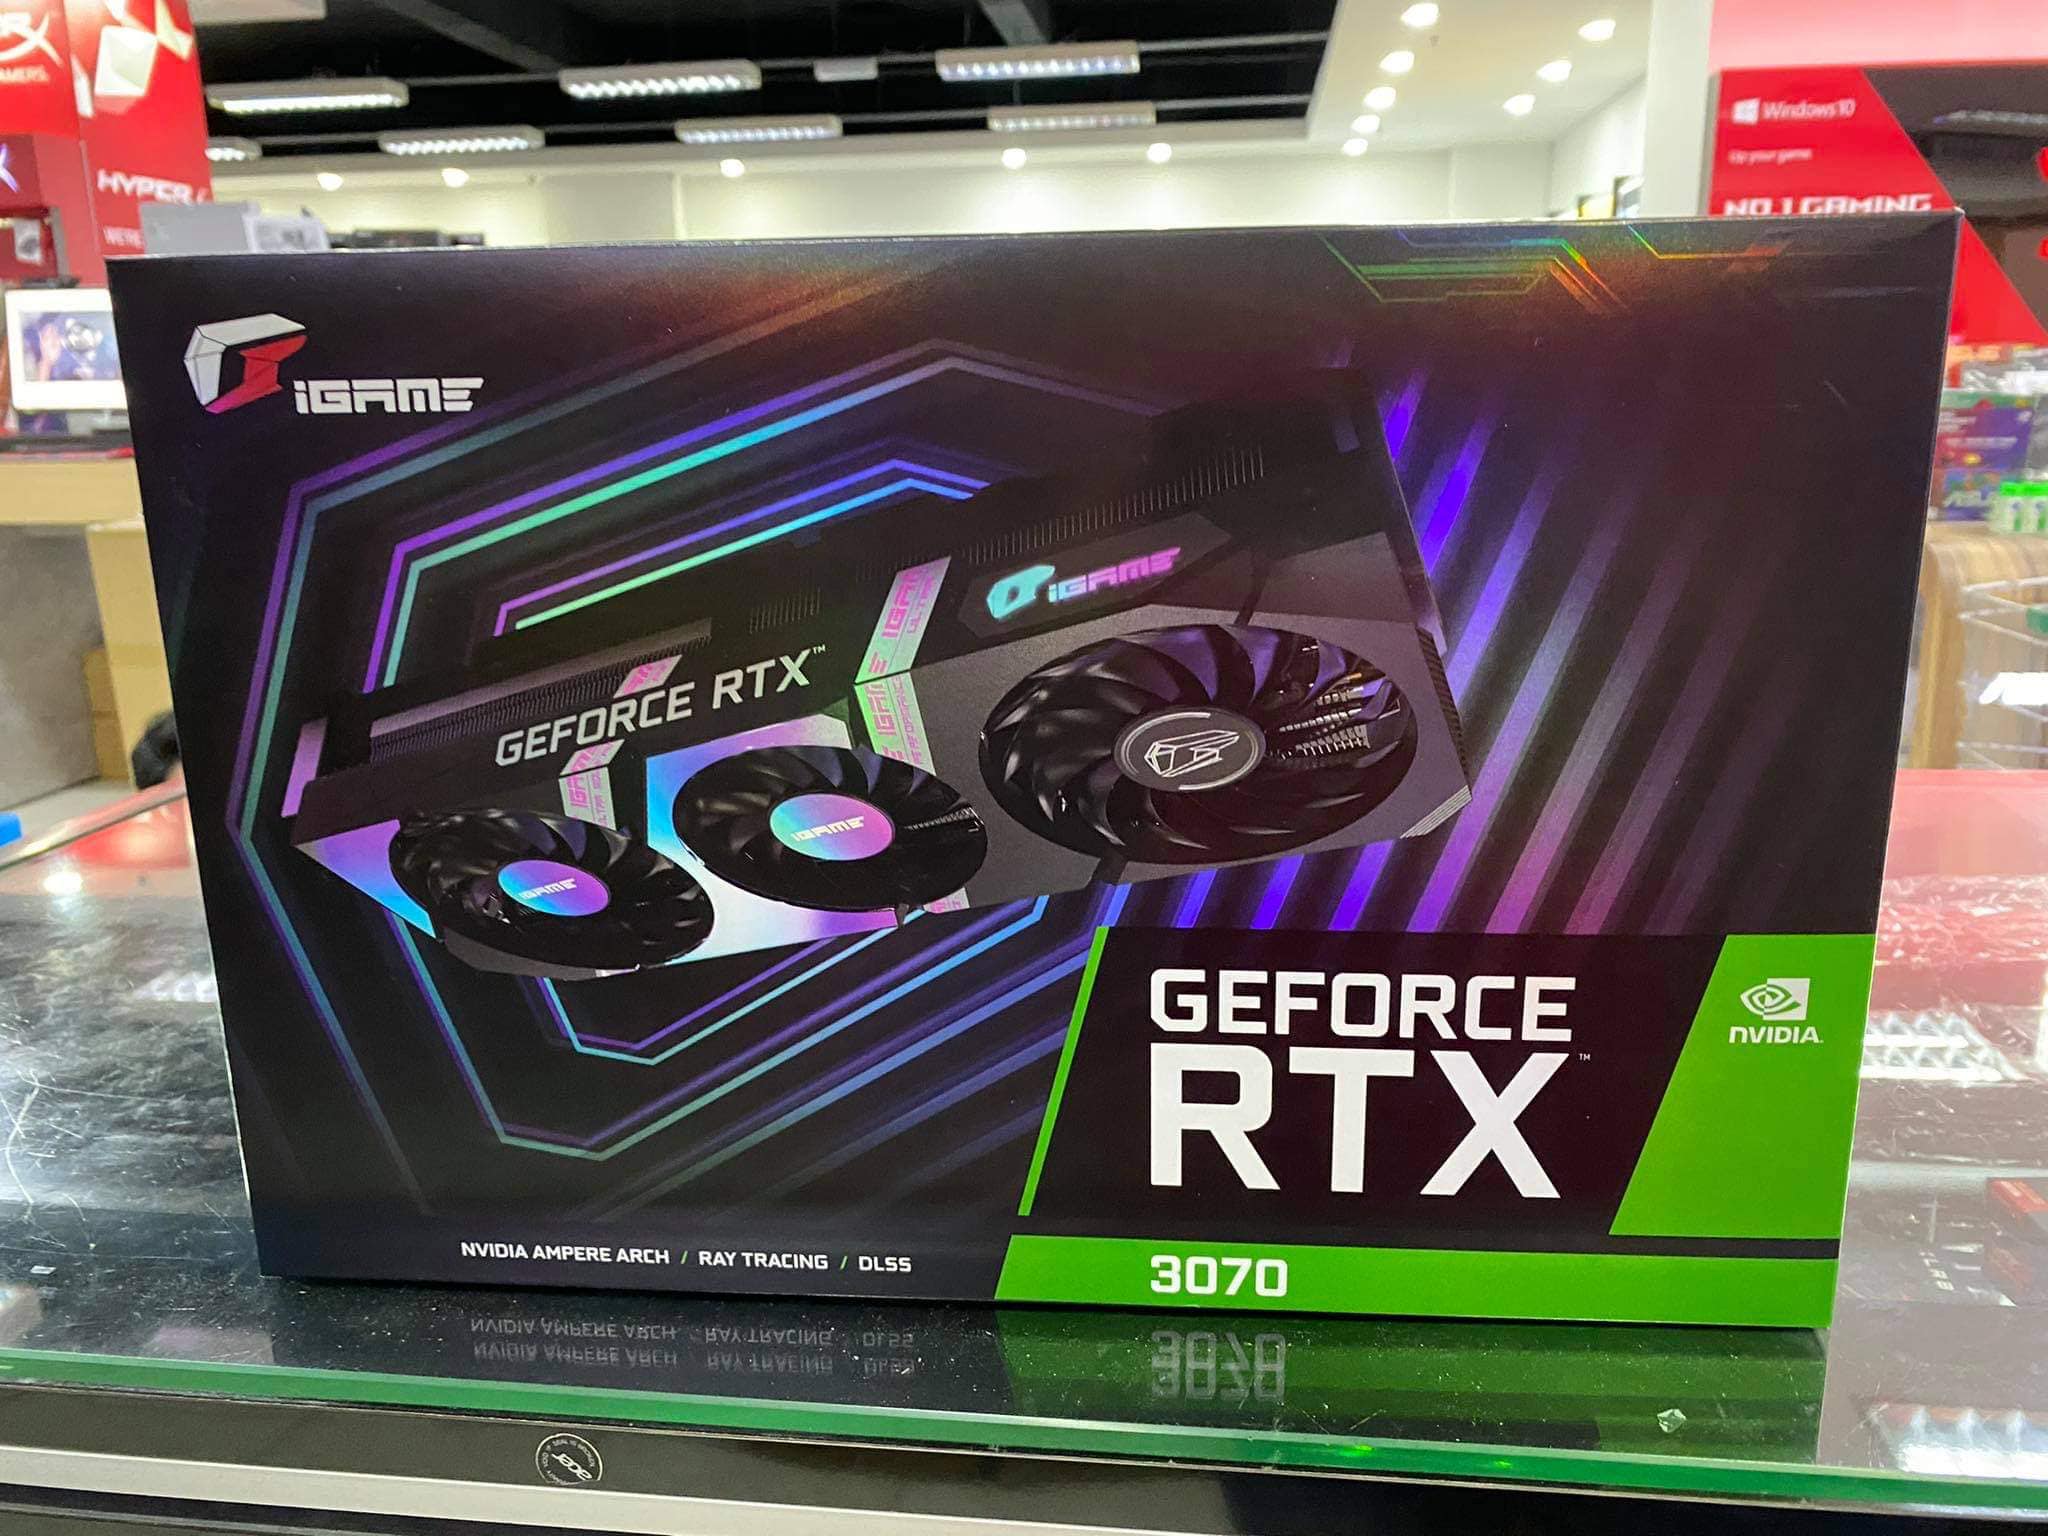 Colorful ultra duo 4060. RTX 3070 IGAME. RTX 3070 colorful. GEFORCE RTX 3070 Ultra w OC 8g. Colorful IGAME GEFORCE RTX 3070 Ultra w OC-V 8gb.